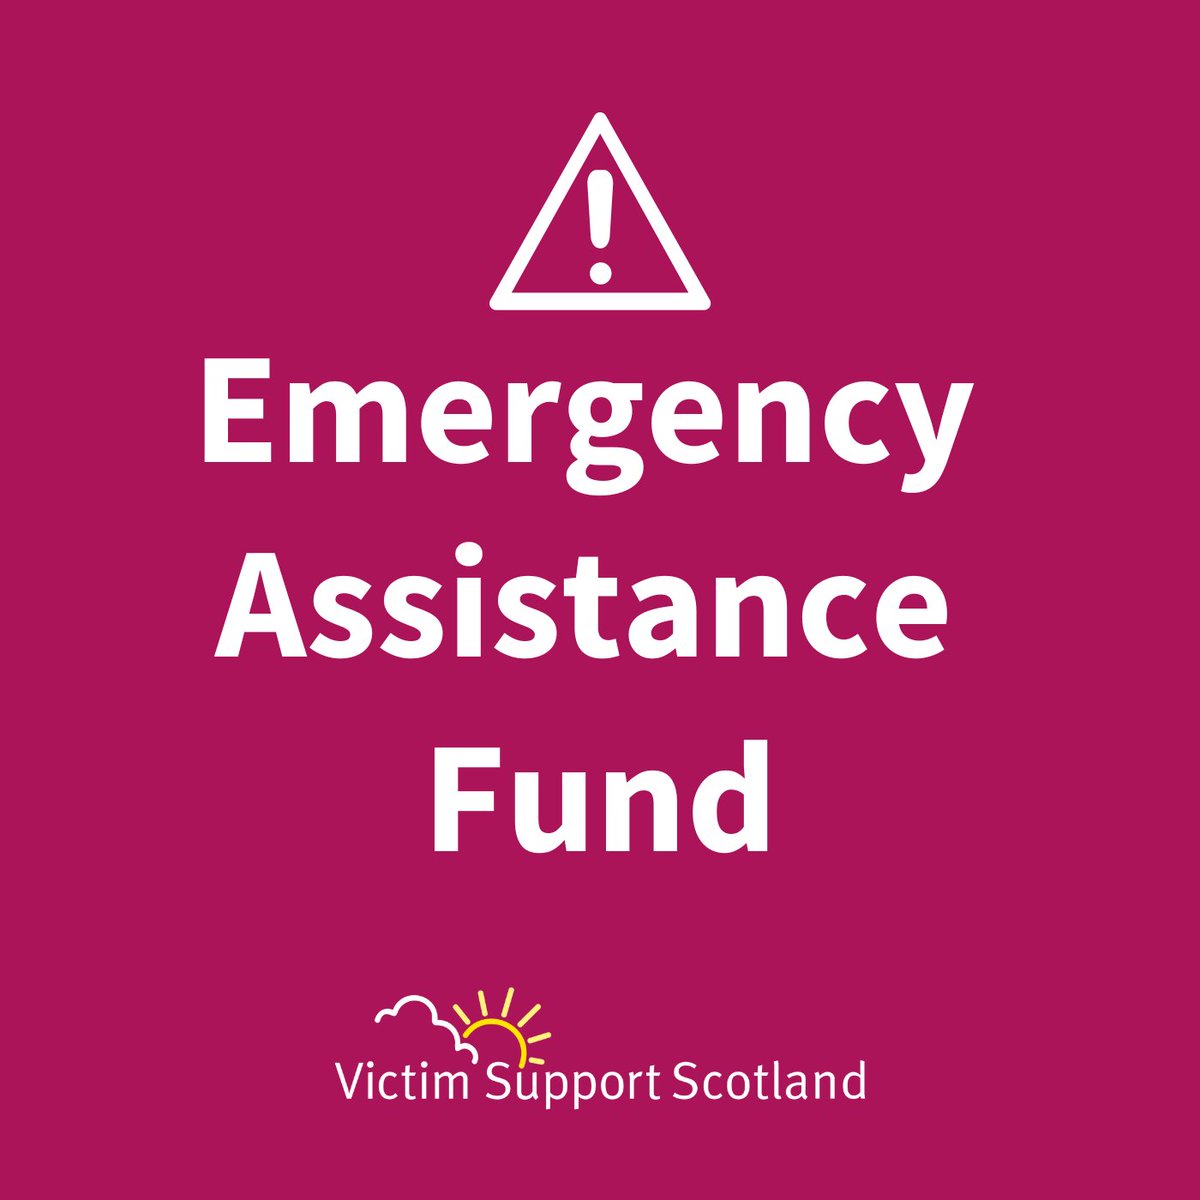 Our Emergency Assistance Fund (EAF) is open to people affected by crime across Scotland who are in urgent need of financial help as a direct result of crime. Accessible to people with no alternative funding, the EAF covers essential goods and services. victimsupport.scot/vss-eaf/